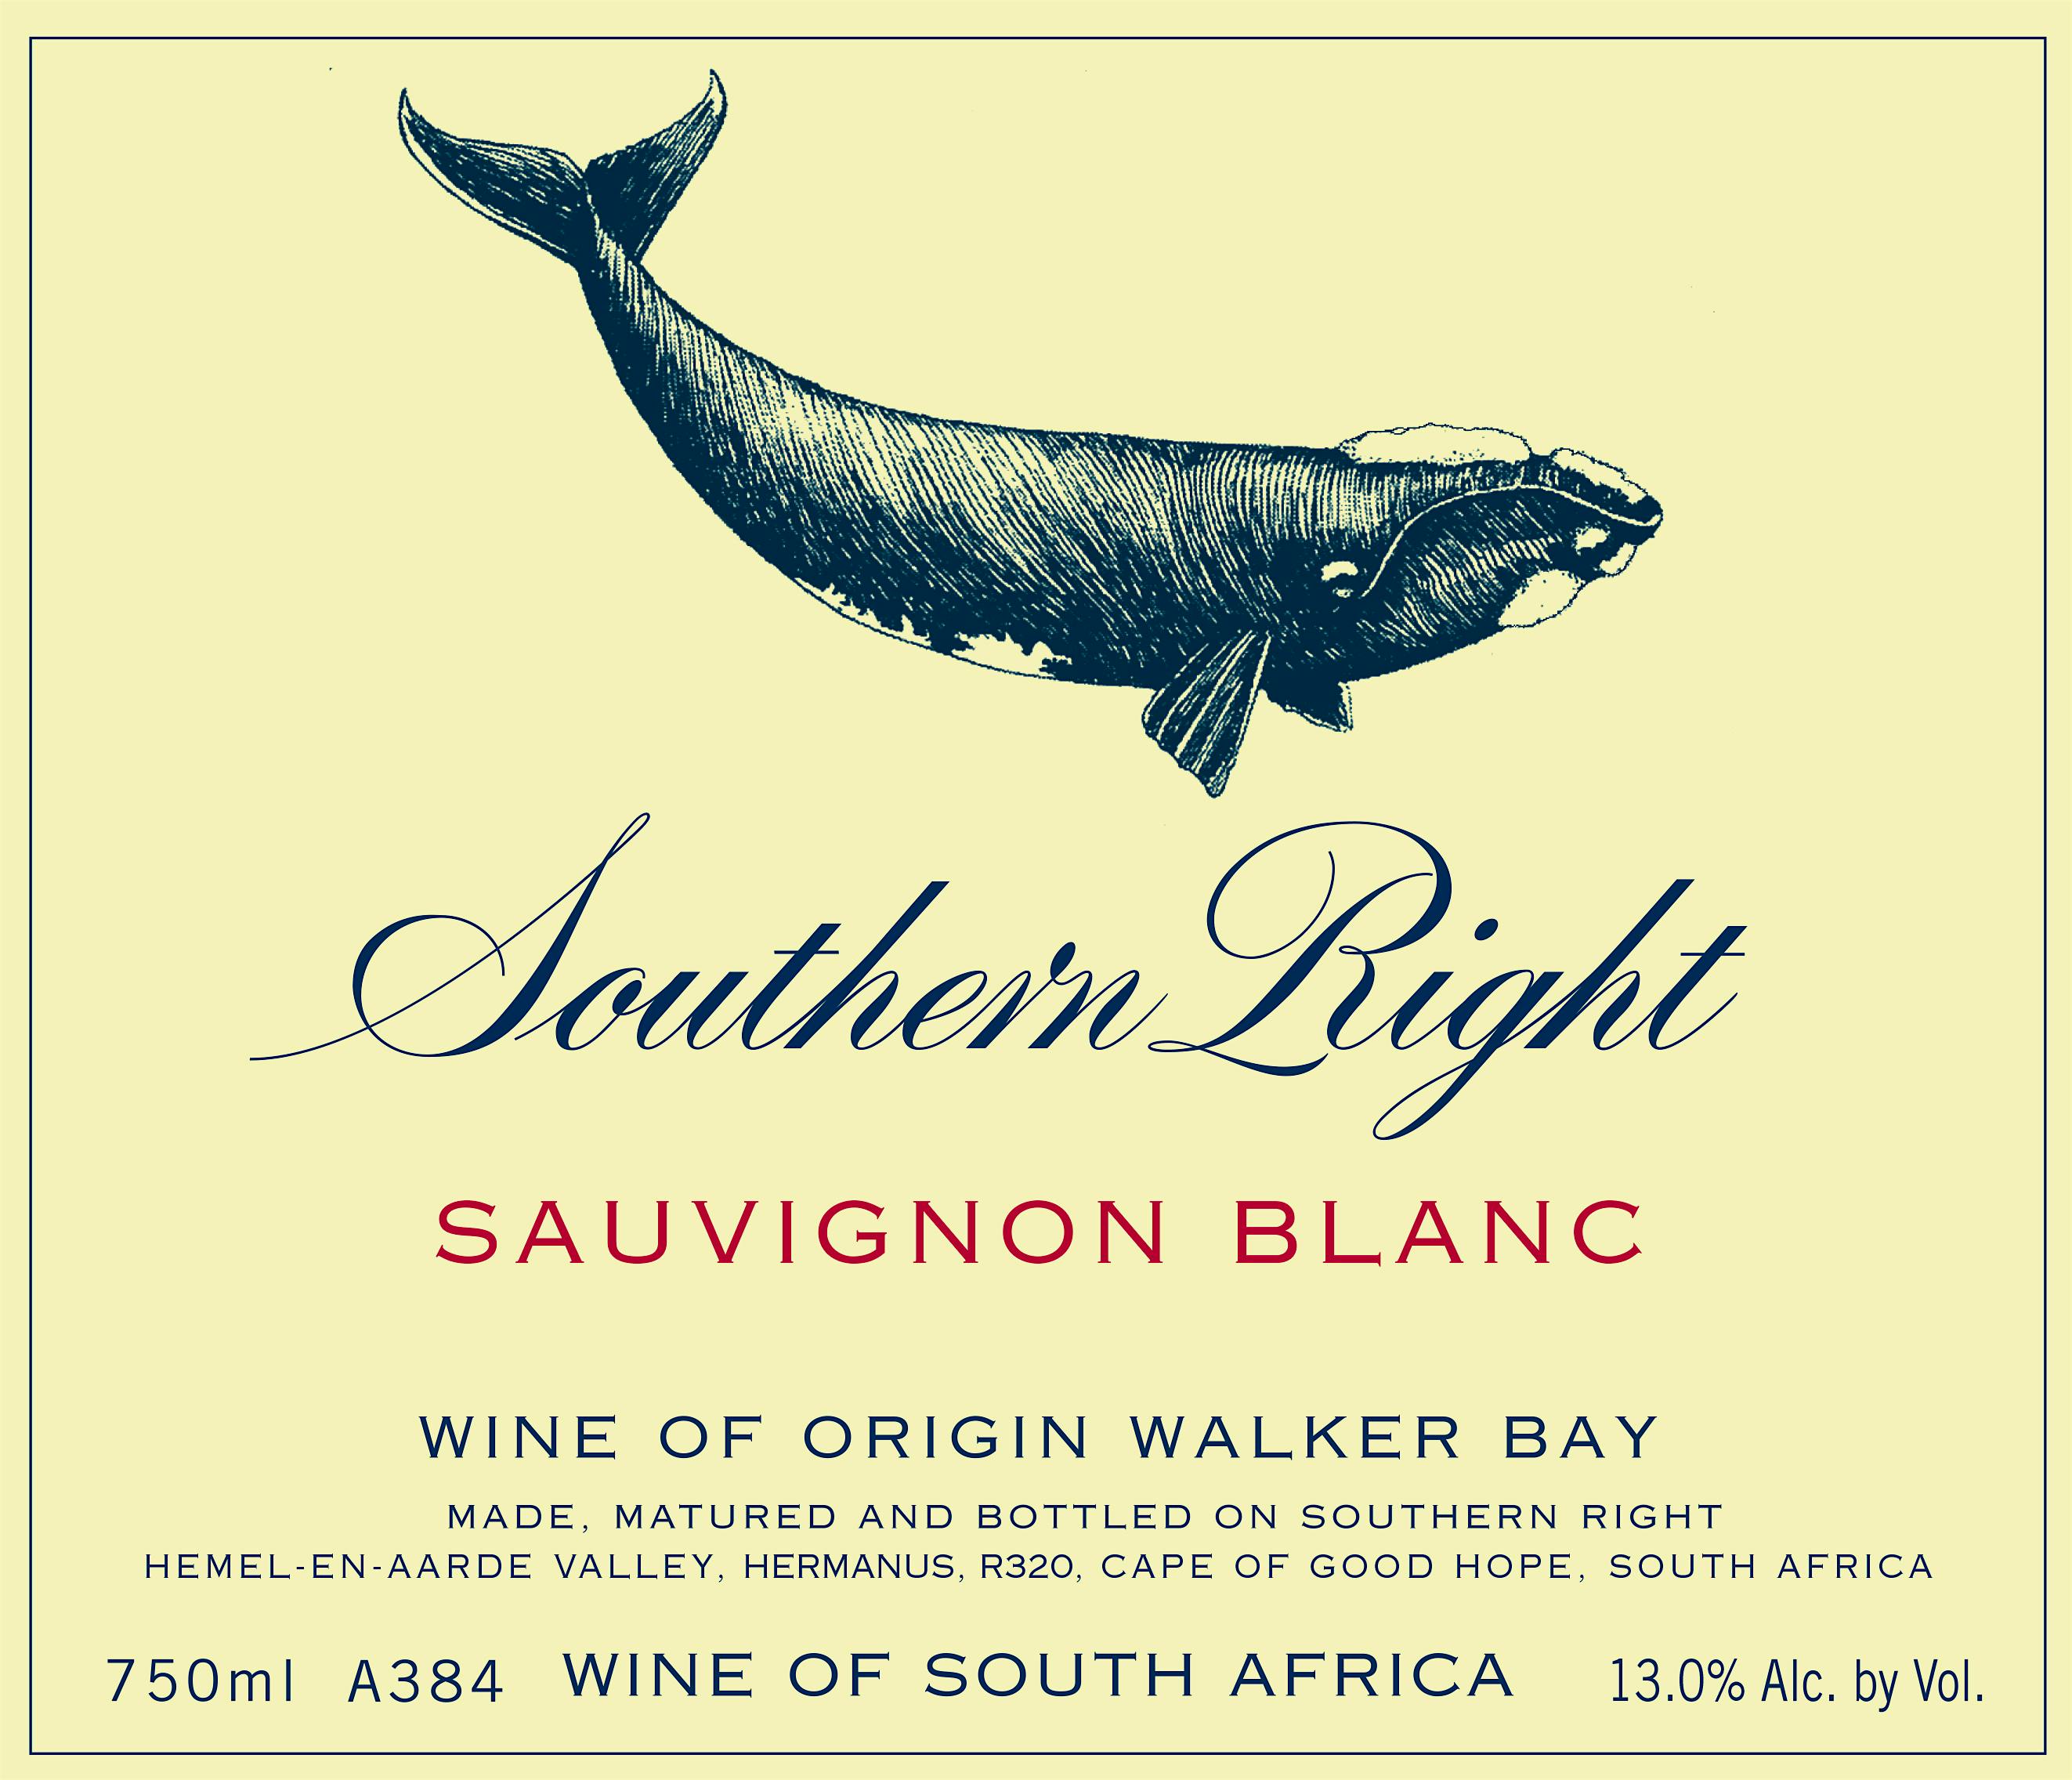 Label for Southern Right